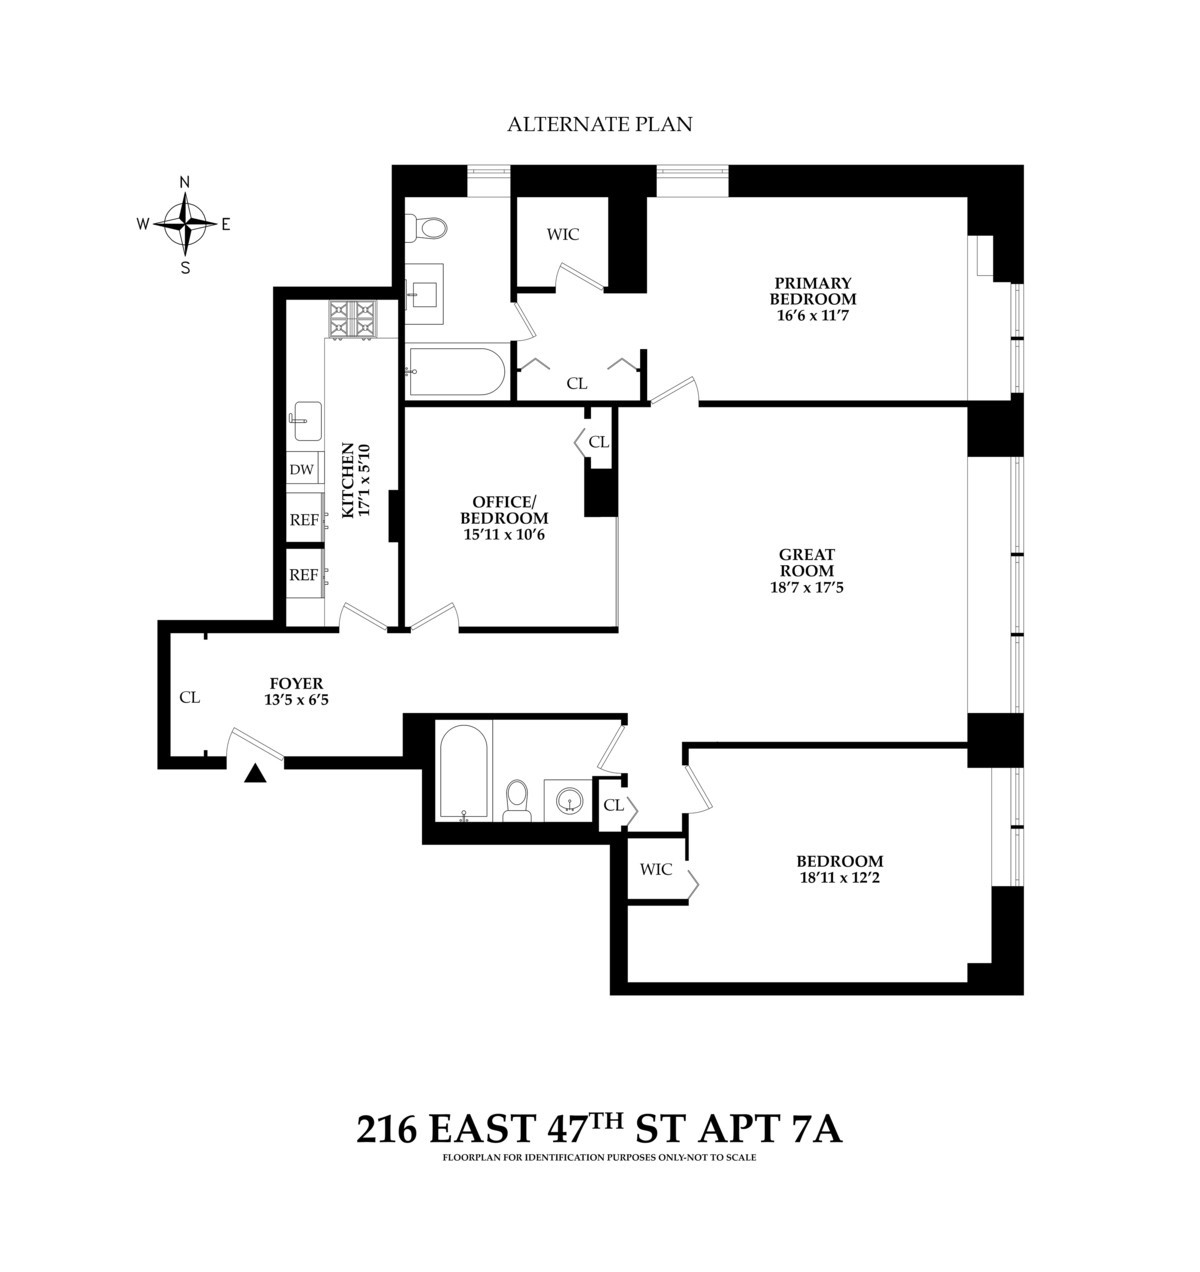 12. Condominiums for Sale at The Octavia, 216 E 47TH ST, 07A Turtle Bay, New York, NY 10017